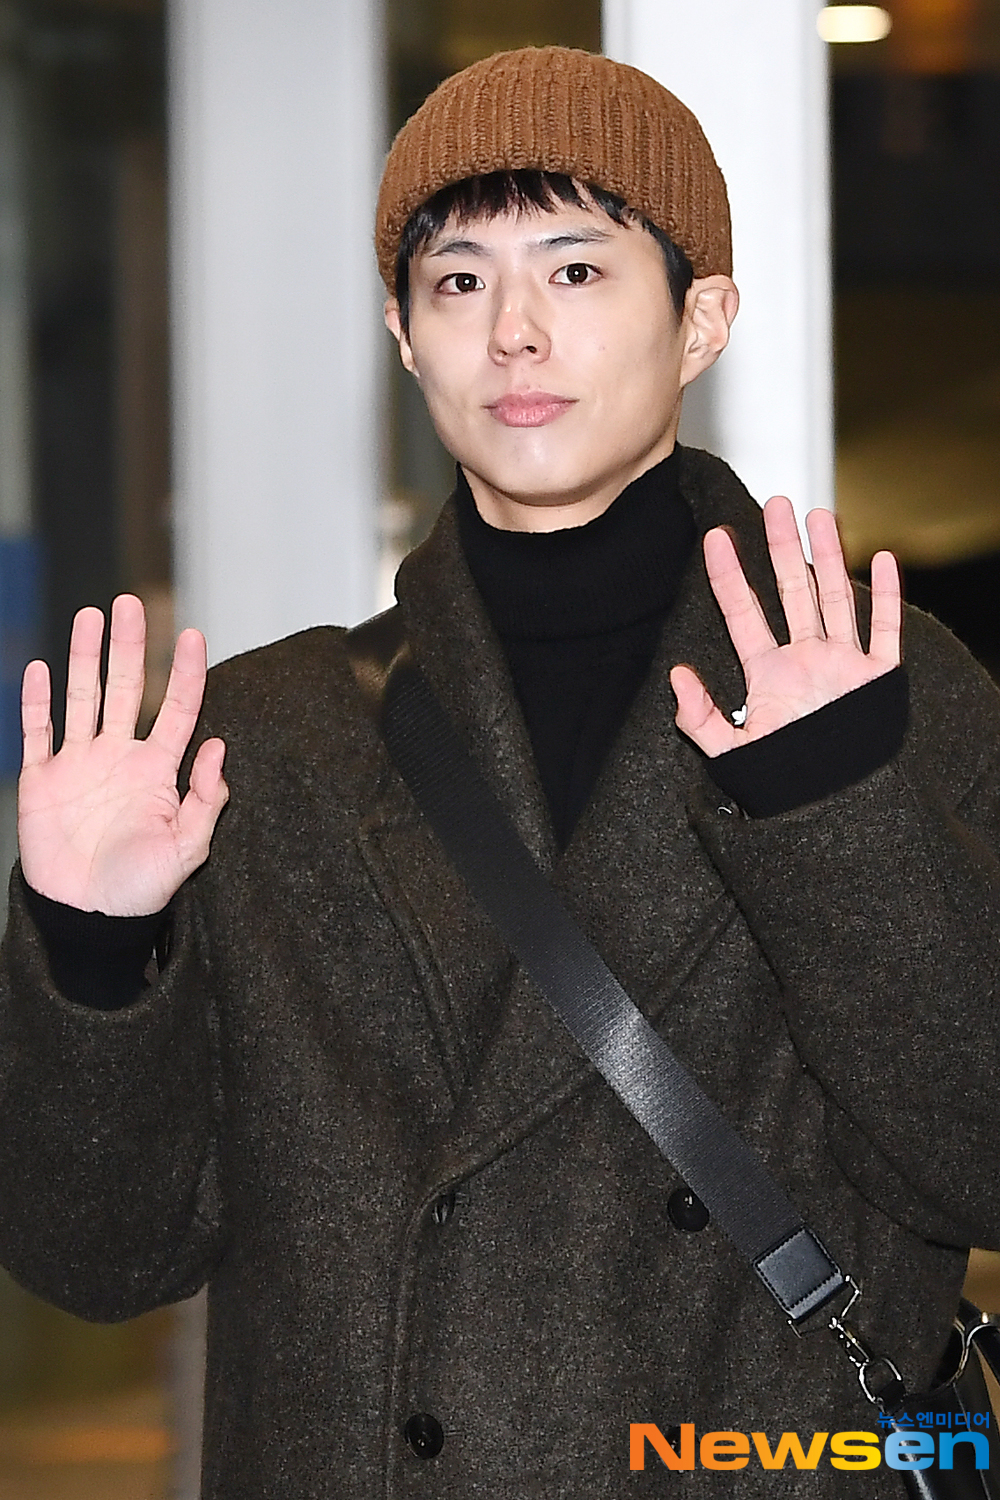 Actor Park Bo-gum (PARK BO GUM) departed for Japan Nagoya on December 4th (Wednesday) at the Japan Nagoya Dome on December 3rd through the Incheon International Airport in Unseo-dong, Jung-gu, Incheon, to attend the 2019 MAMA (Mnet Asian Music Awards 2019 Mnet Asian Music Awards).Actor Park Bo-gum (PARK BO GUM) is leaving for Japan.exponential earthquake